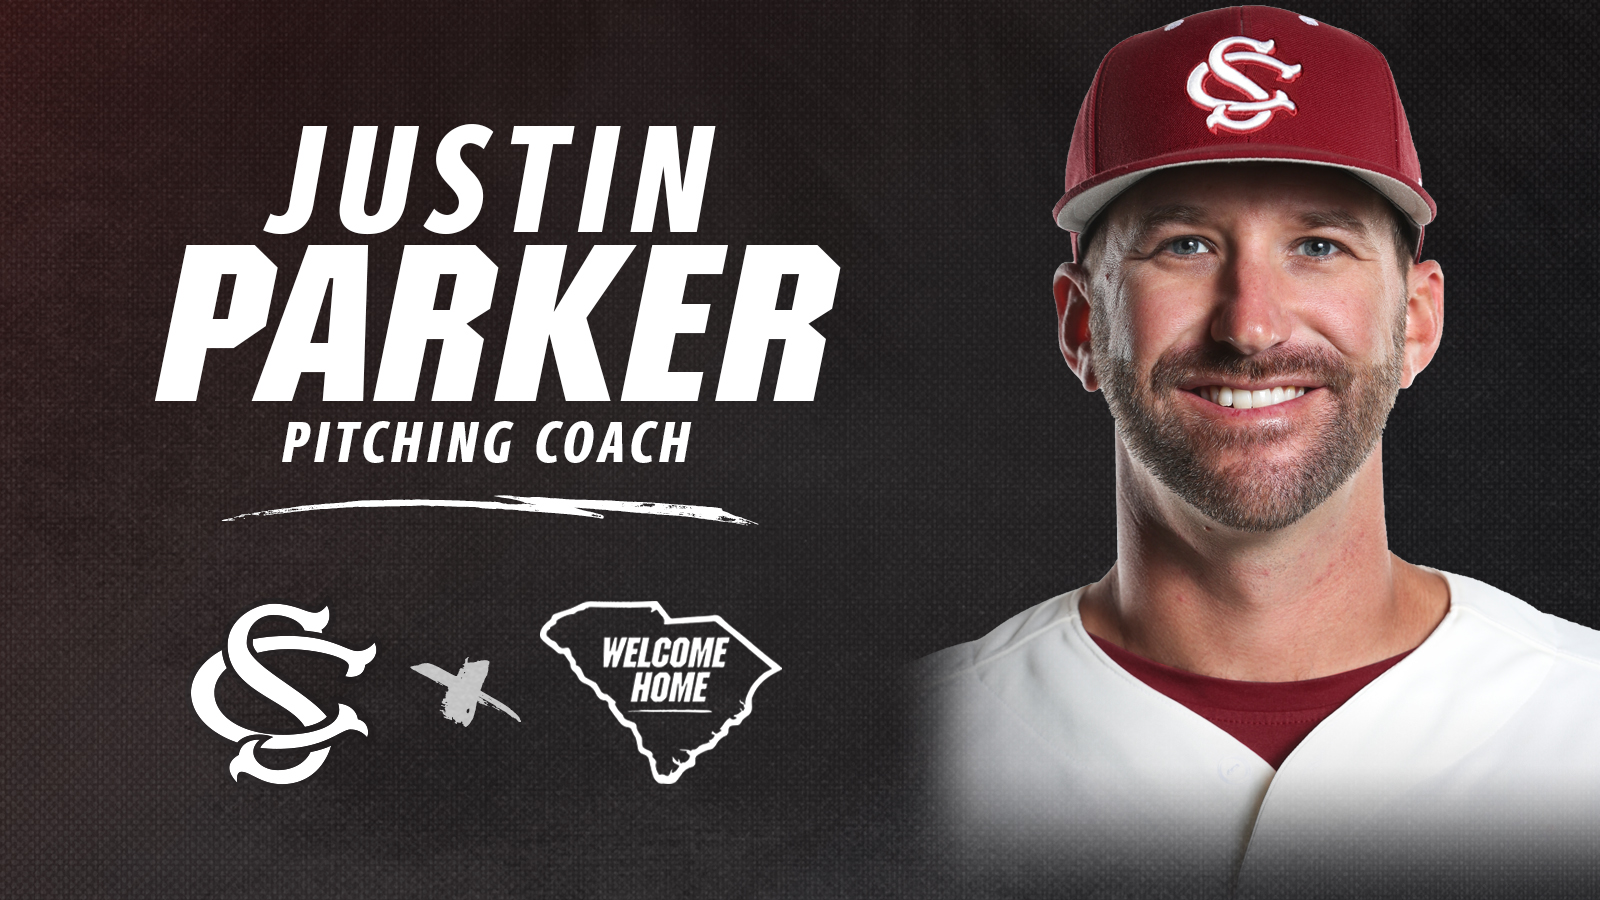 Baseball Announces Hiring of Justin Parker as Pitching Coach